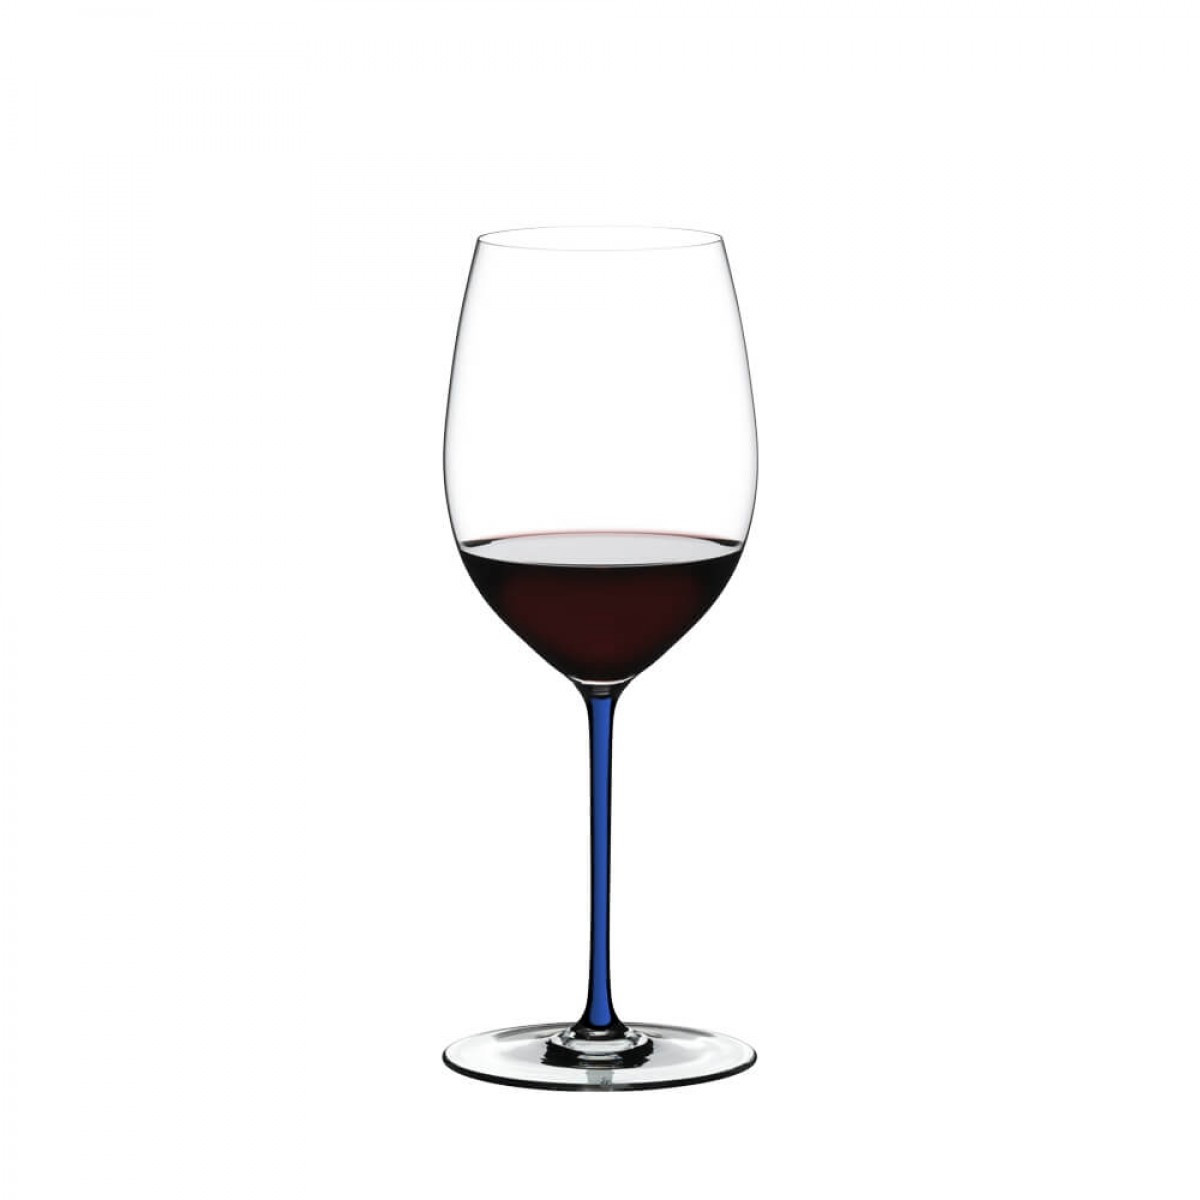 29 Lovable Different Types Of Glass Vases 2024 free download different types of glass vases of fatto a mano cabernet dark blue 4900 0d type glasses riedel inside fatto a mano cabernet dark blue 4900 0d